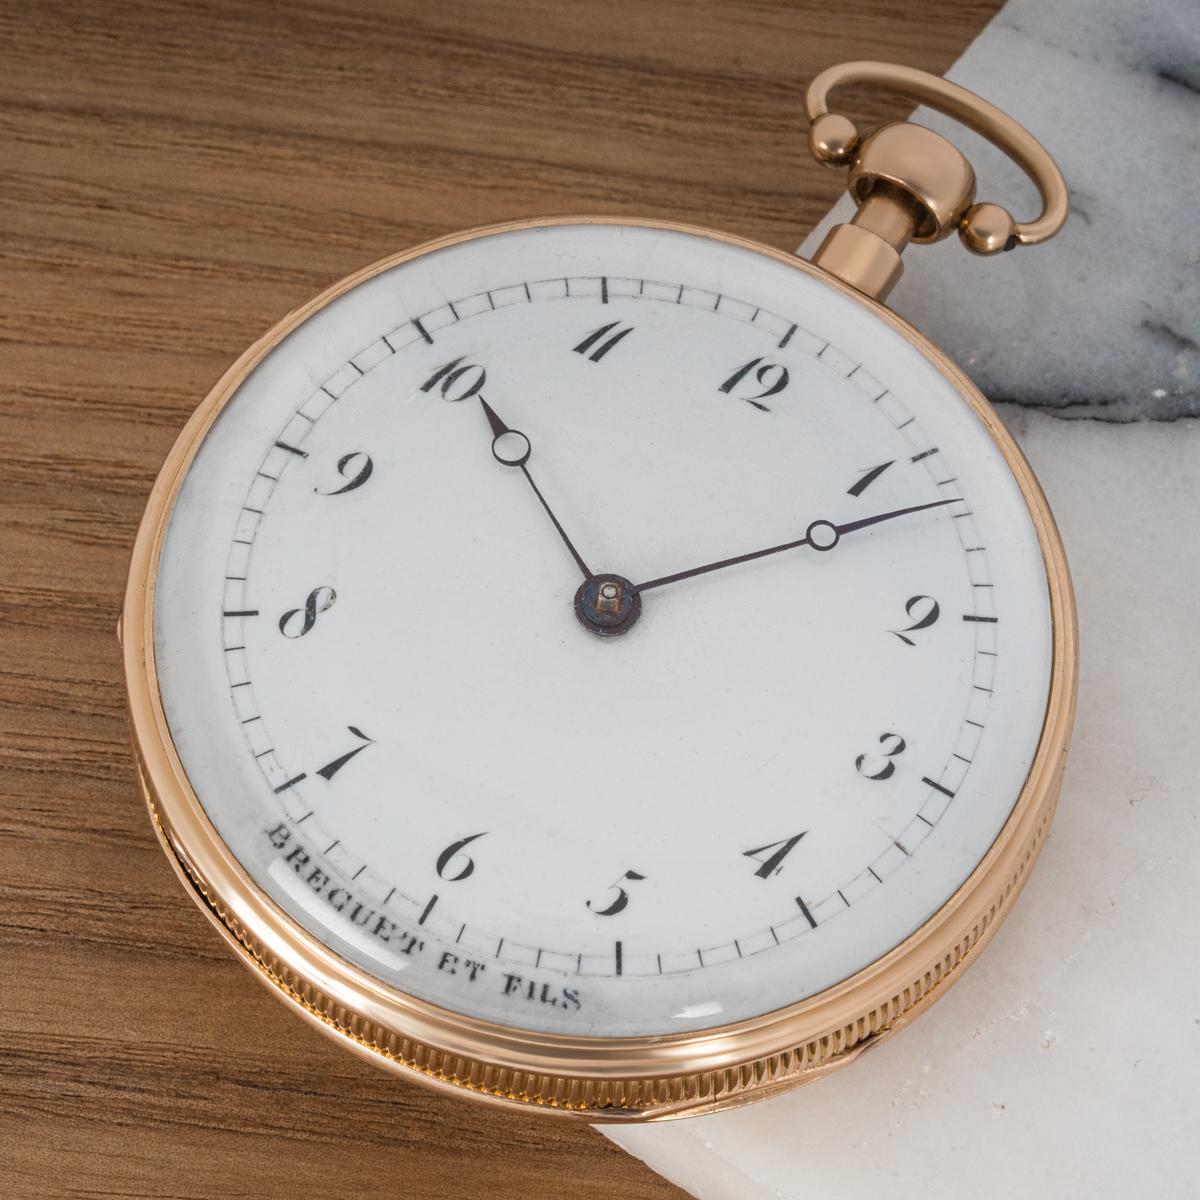 Breguet et Fils. A Rare 18kt Rose Gold Open Faced Keywind Cylinder Musical Quarter Repeater Pocket Watch C1830s.

Dial: The white enamel dial signed Breguet et Fils with Breguet numerals outer minute track with blued Steel Breguet style moon